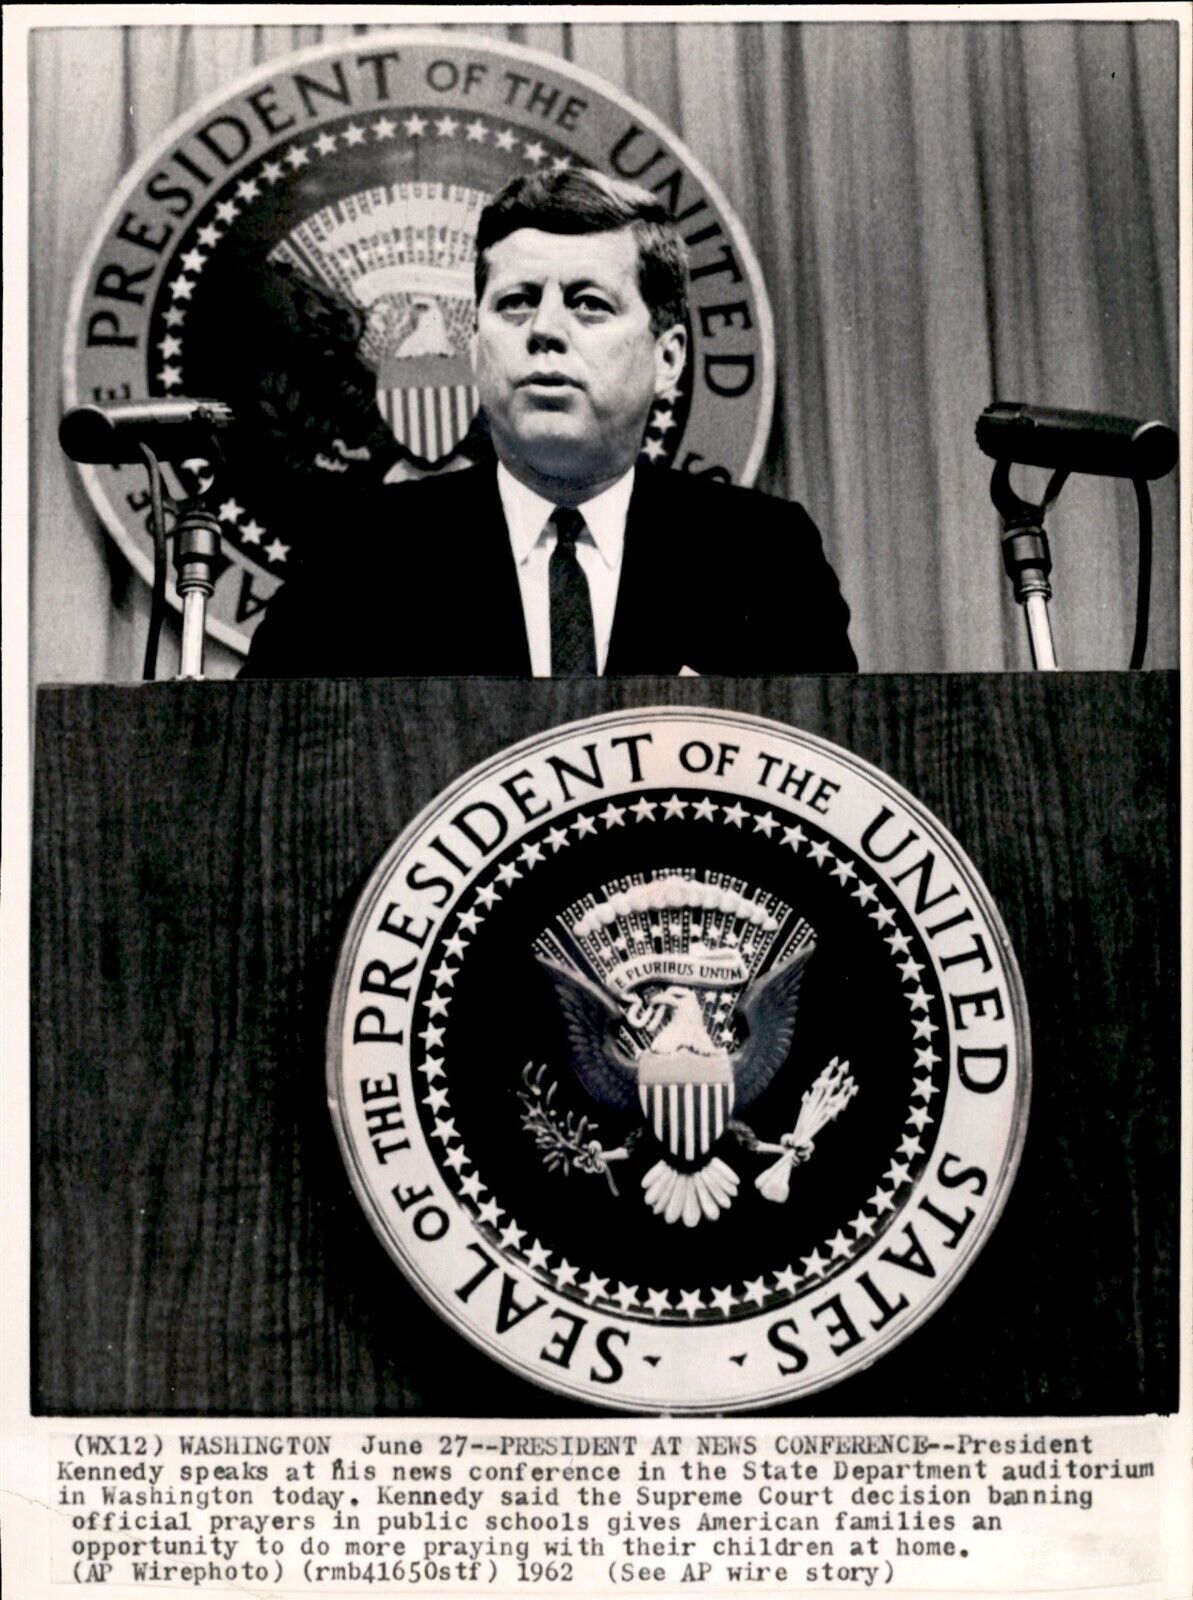 LD249 1962 AP Wire Photo PRESIDENT AT NEWS CONFERENCE JOHN F KENNEDY @ PODIUM